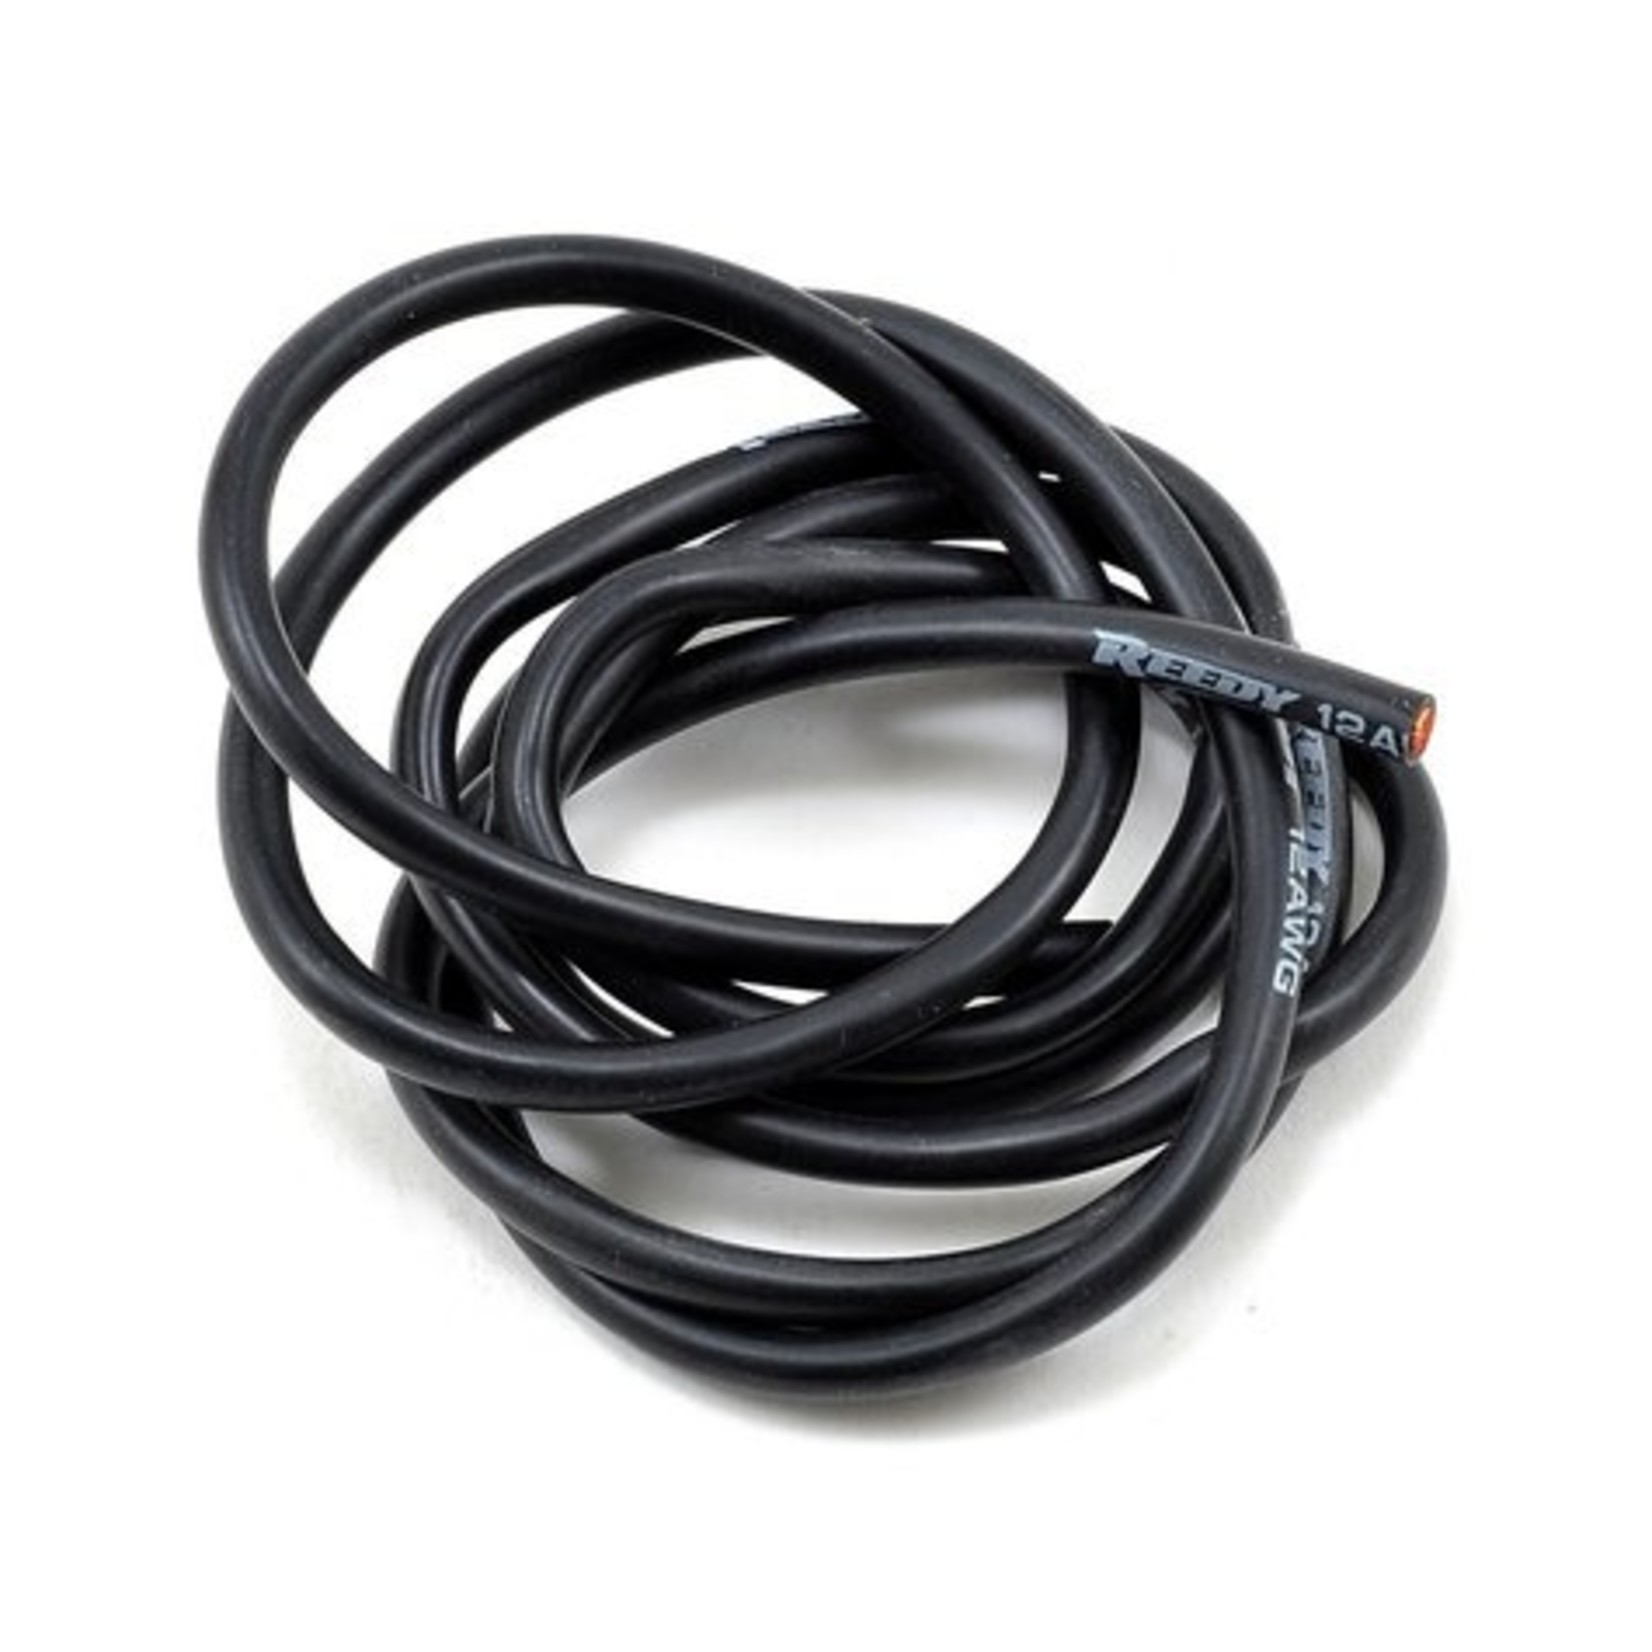 Reedy ASC647 Reedy 12awg Pro Silicone Wire (Black) (1 Meter)